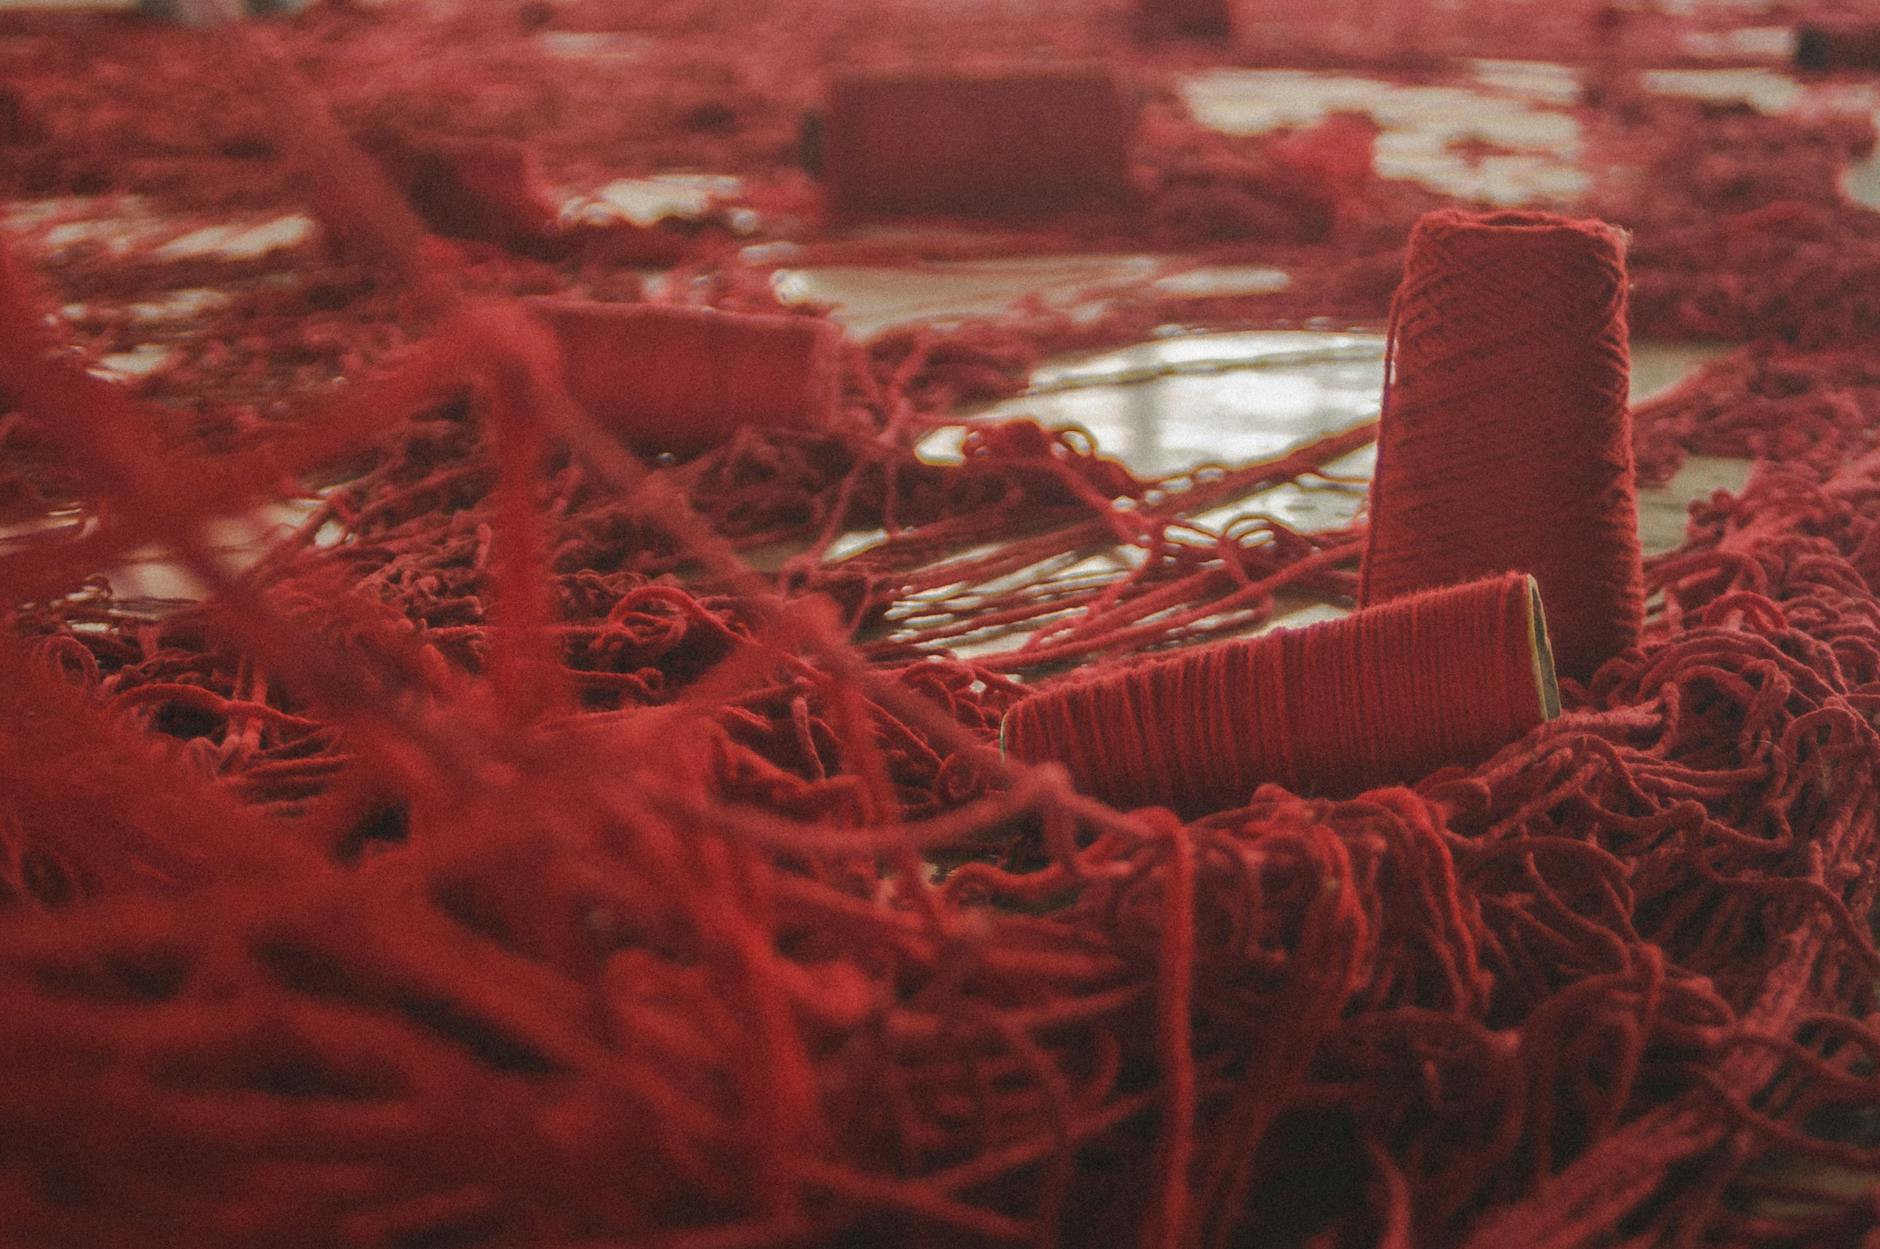 Red sewing thread on spools scattered all over the floor